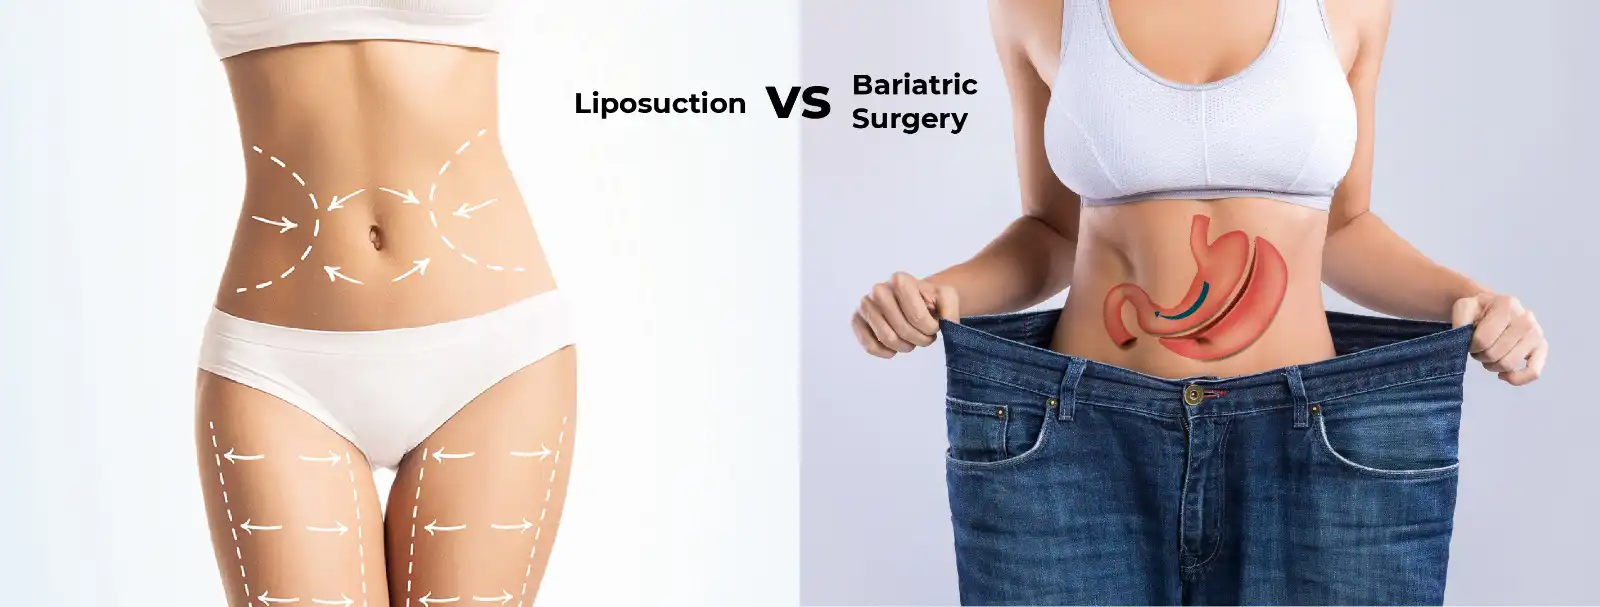 Liposuction vs Tummy Tuck: Differences and Procedures